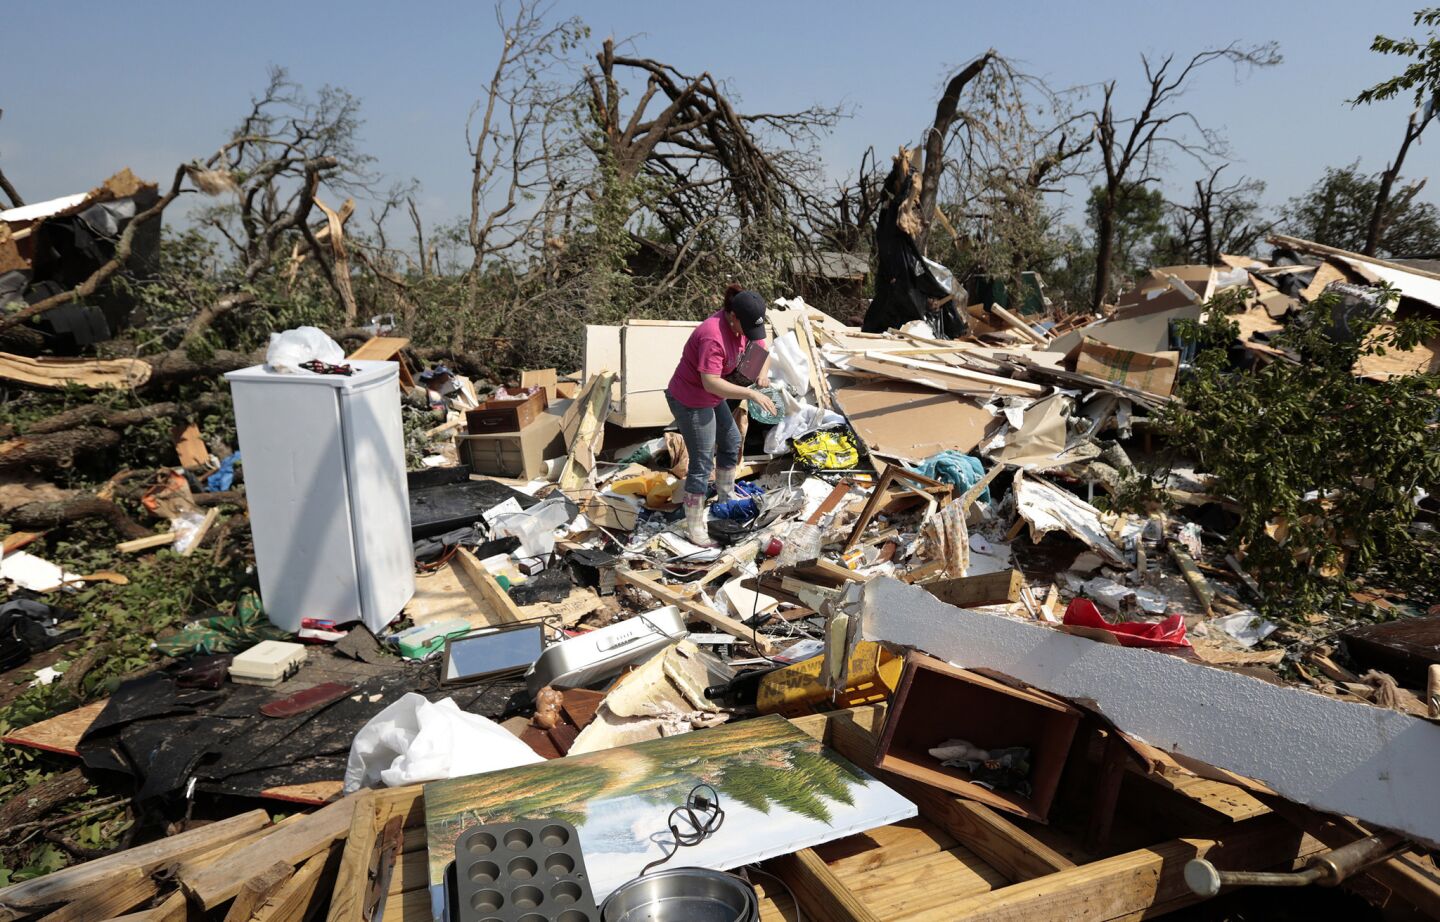 Kasey Clark sorts through the debris of her grandmother-in-law Thelma Cox's mobile home after it was destroyed by a tornado near Shawnee, Okla. A series of tornados moved across central Oklahoma on Sunday, killing two people and injuring at least 21.